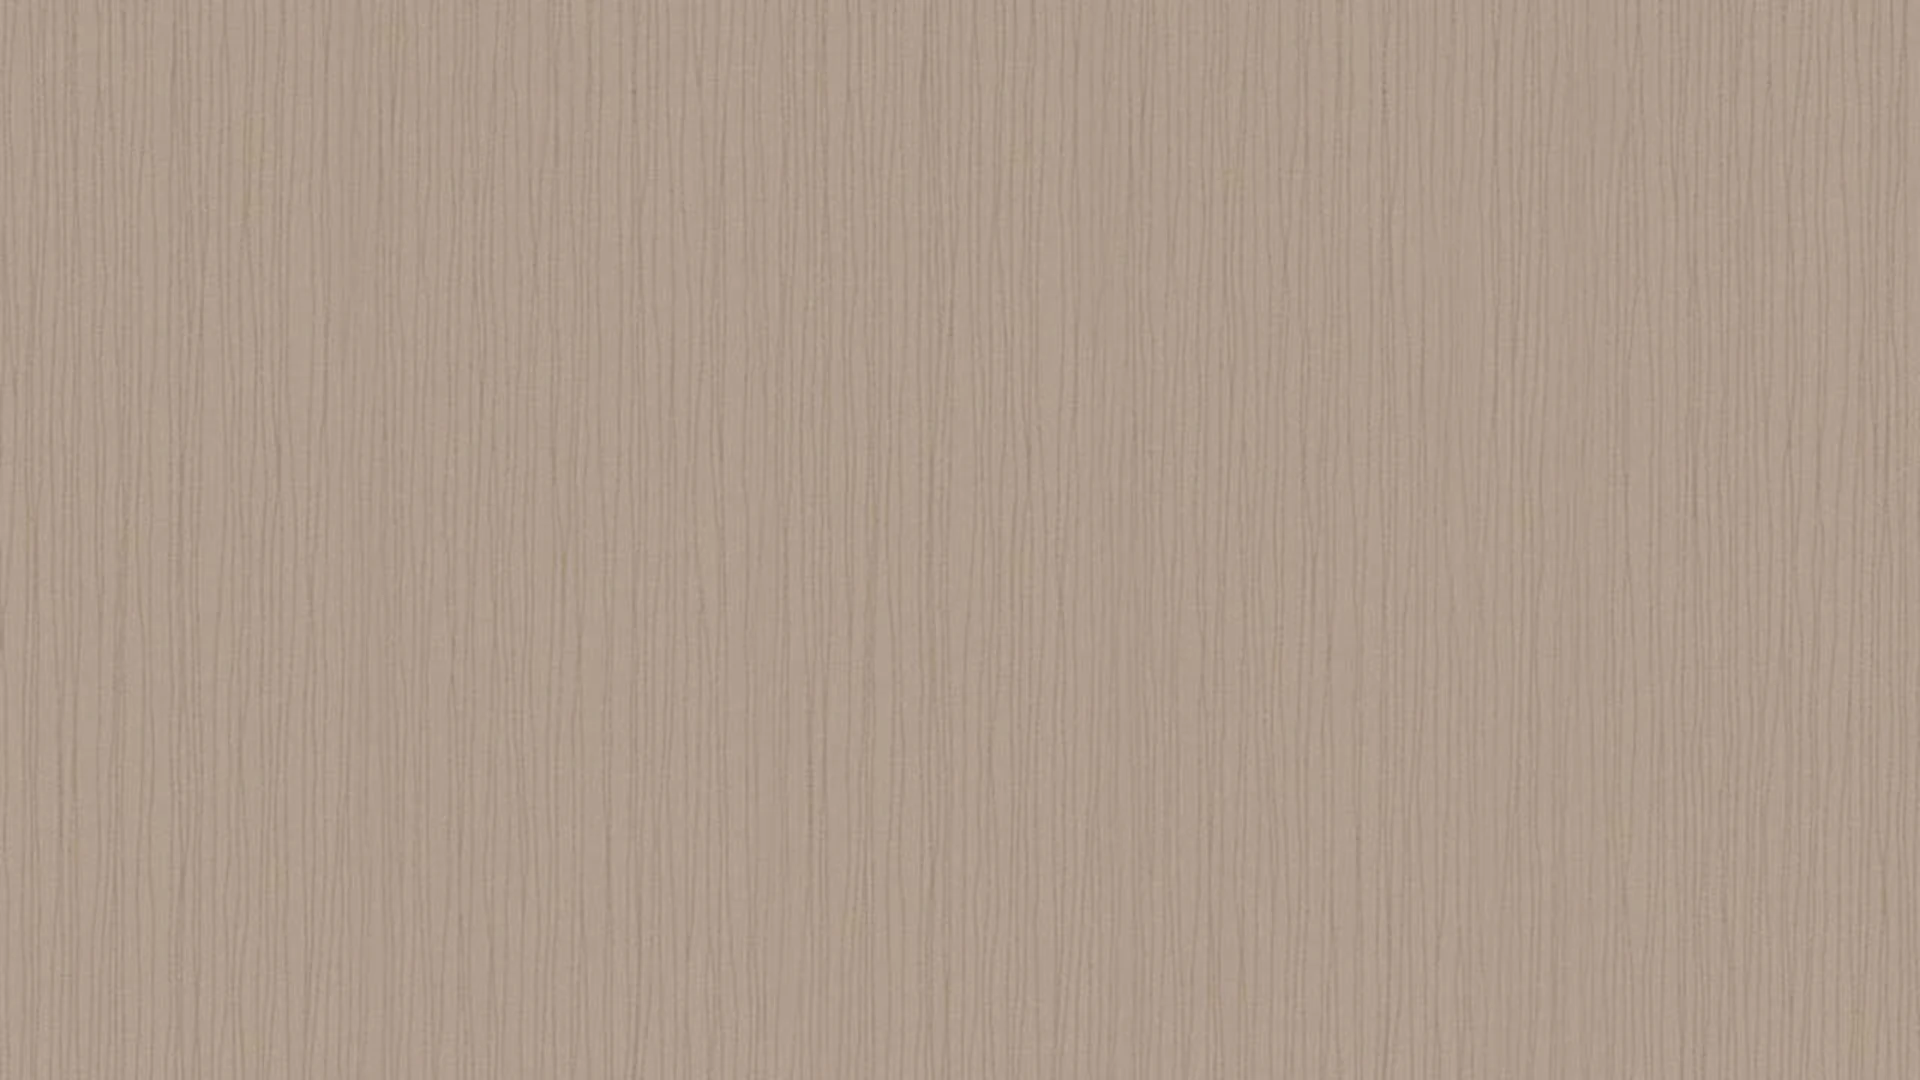 vinyl wallcovering brown classic plains style guide natural colours 2021 510